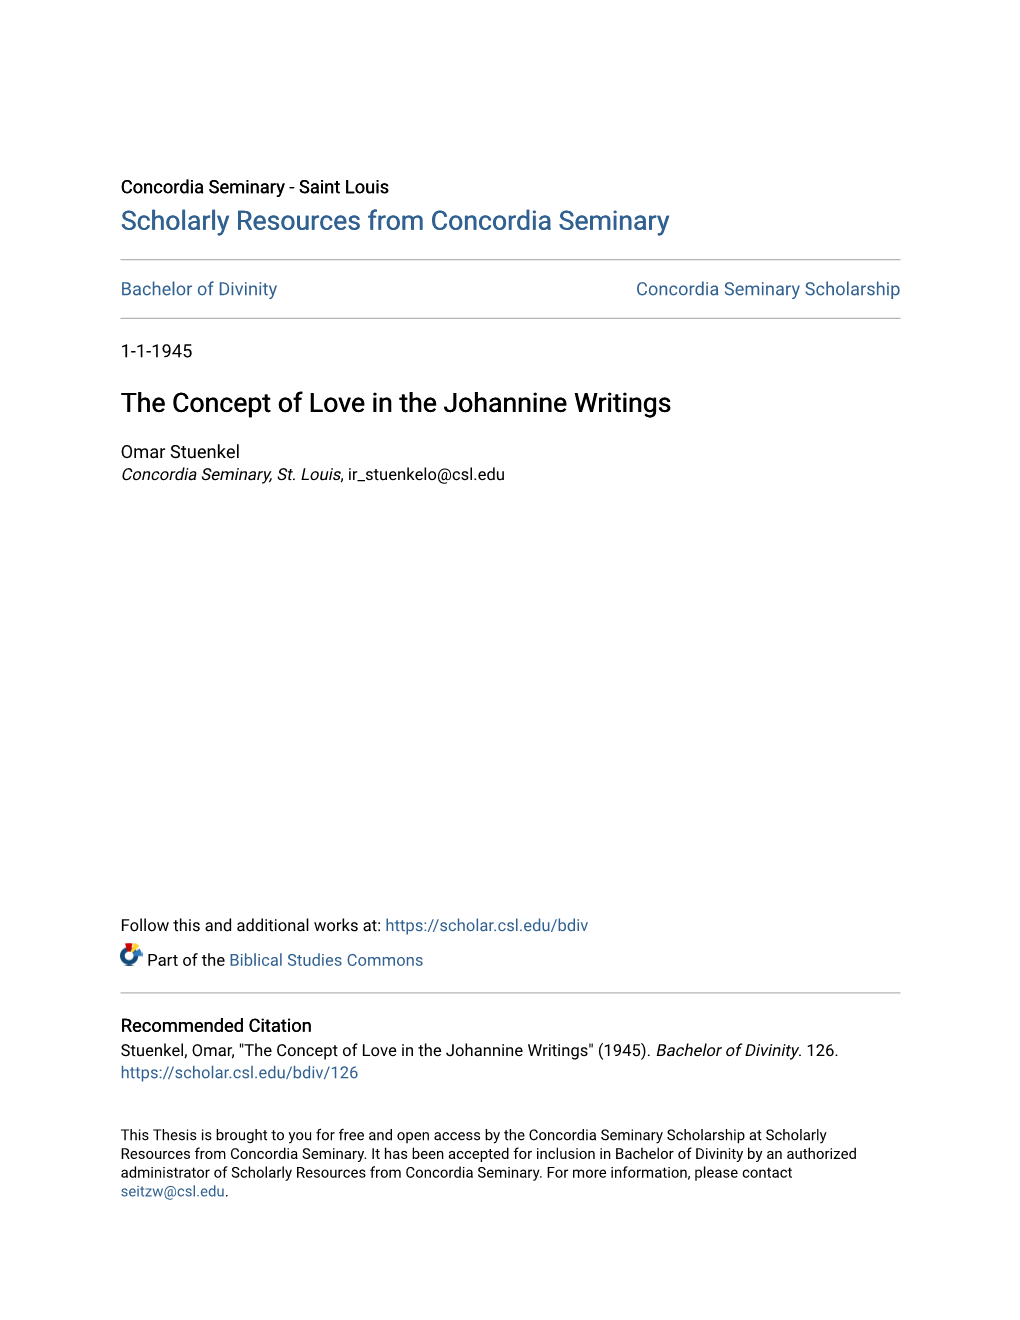 The Concept of Love in the Johannine Writings